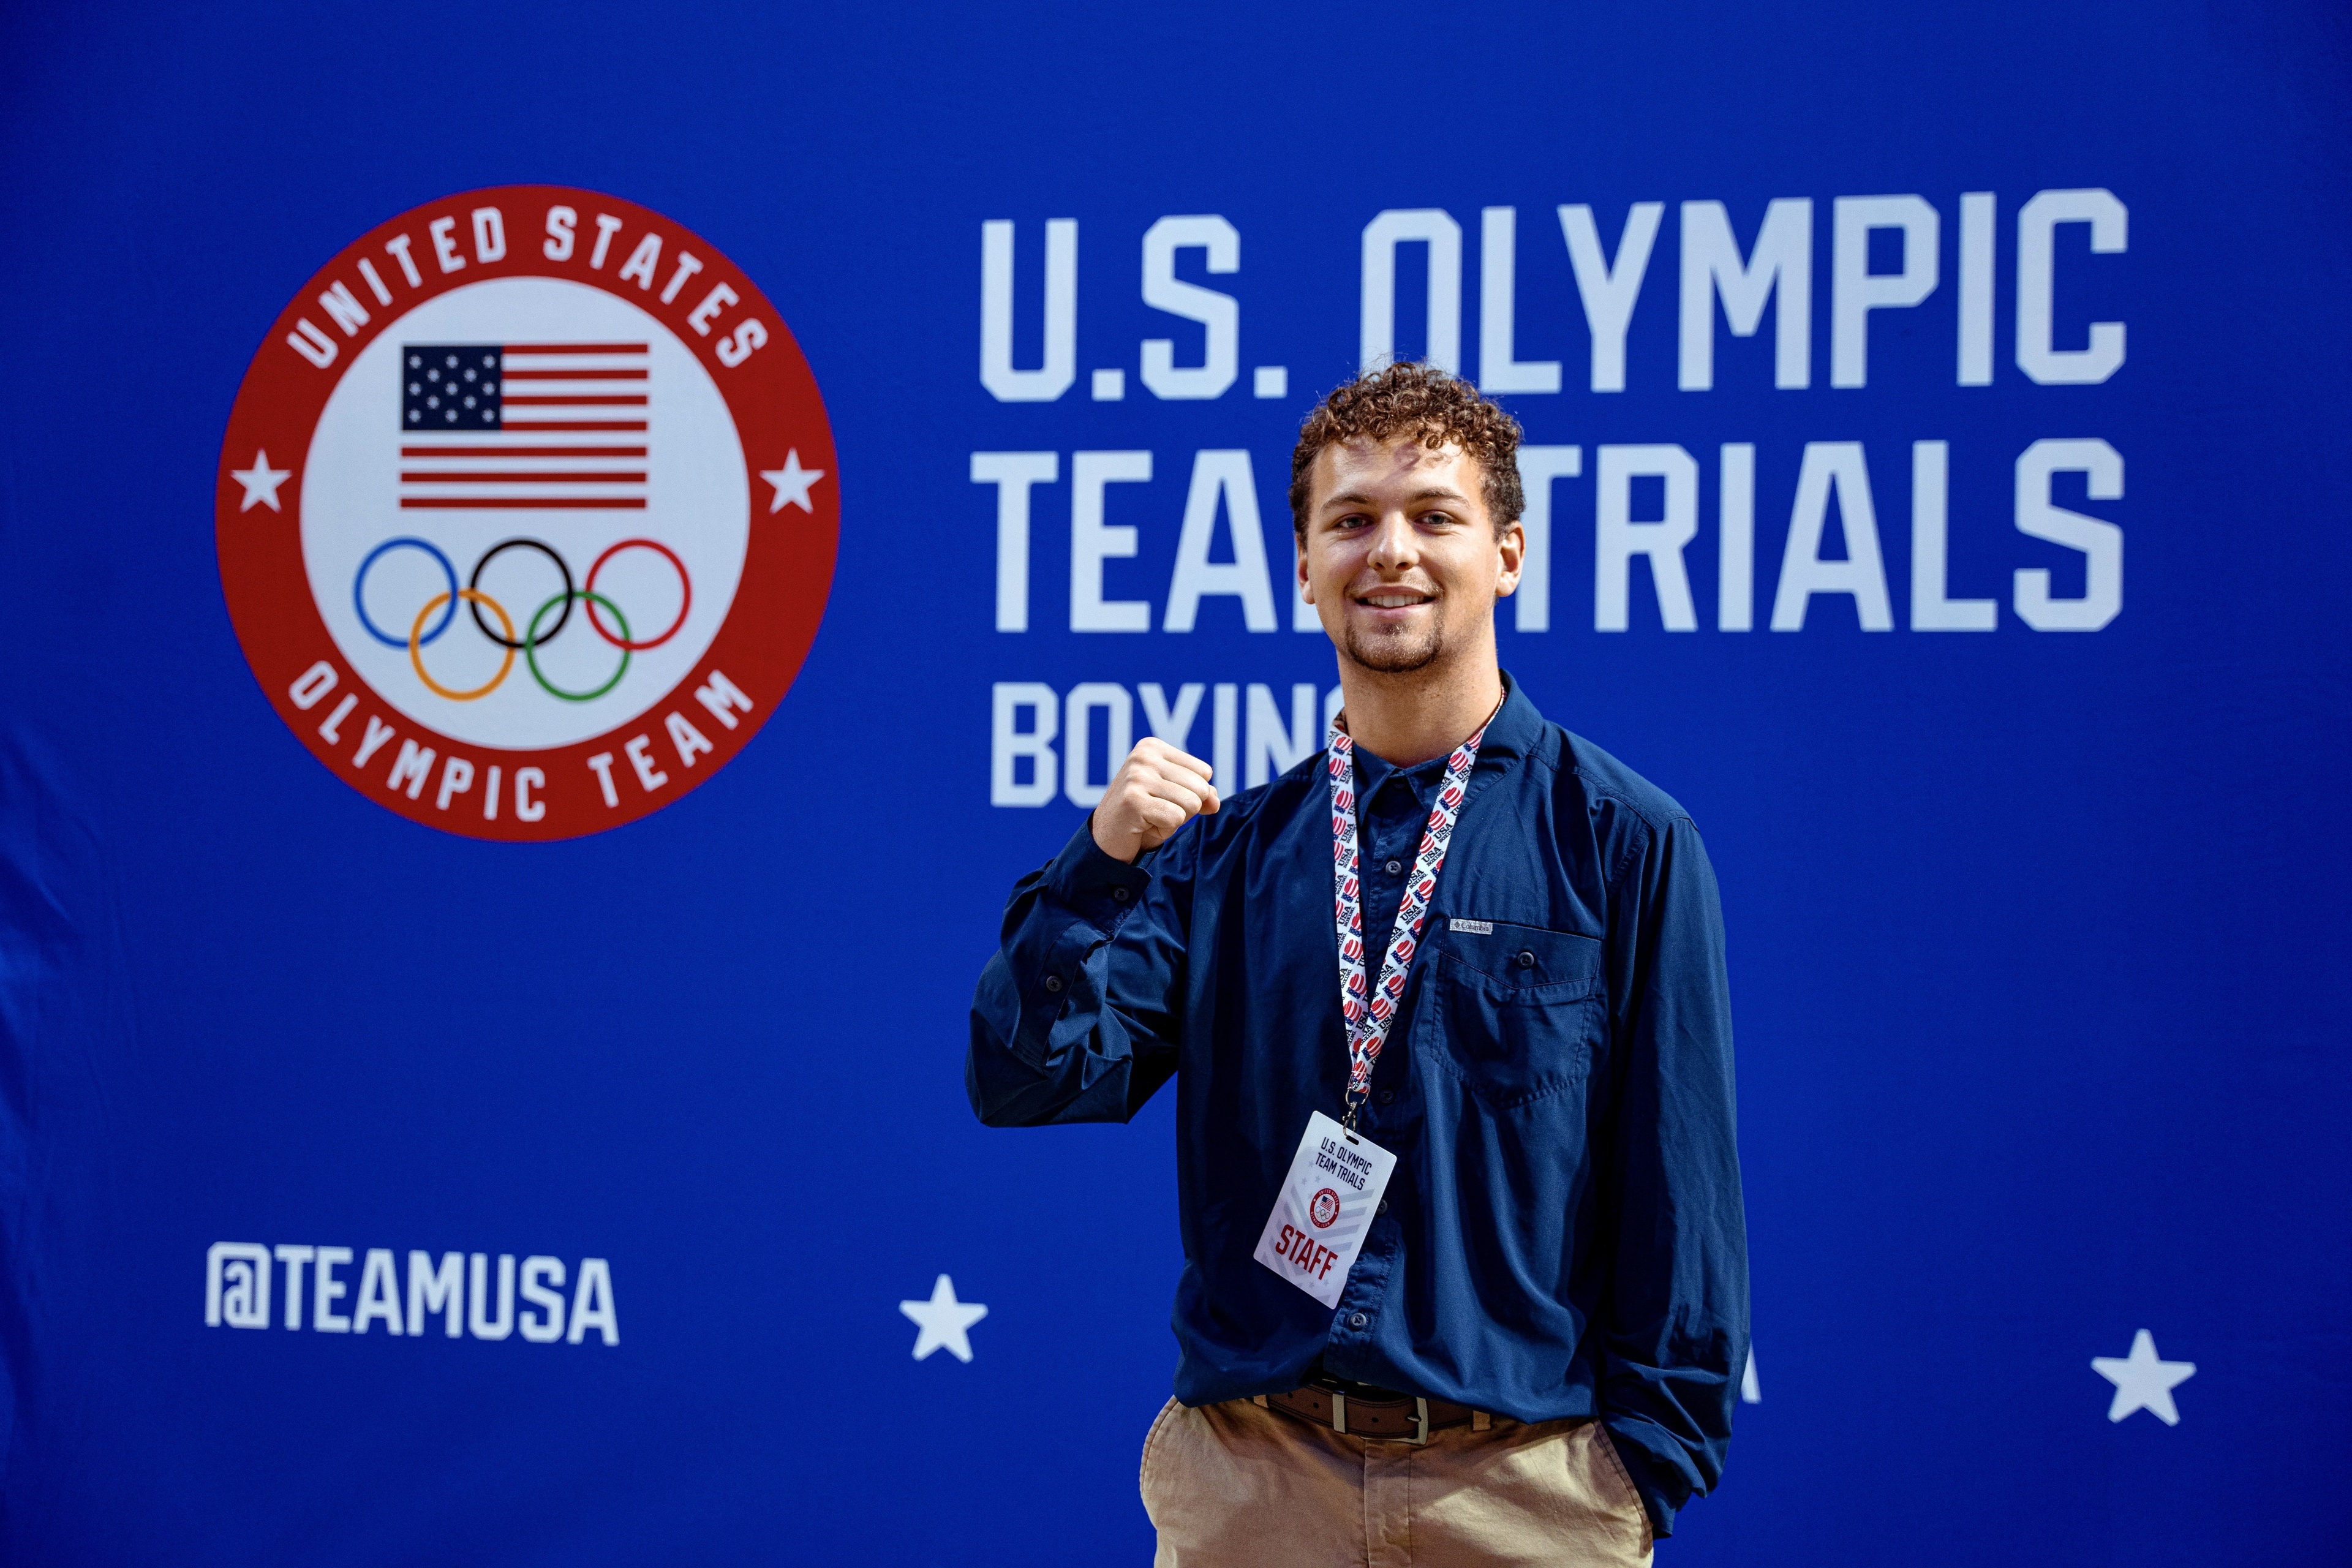 Nathan Kubala stands in front of a large blue background that reads "U.S. Olympic Team Trials."